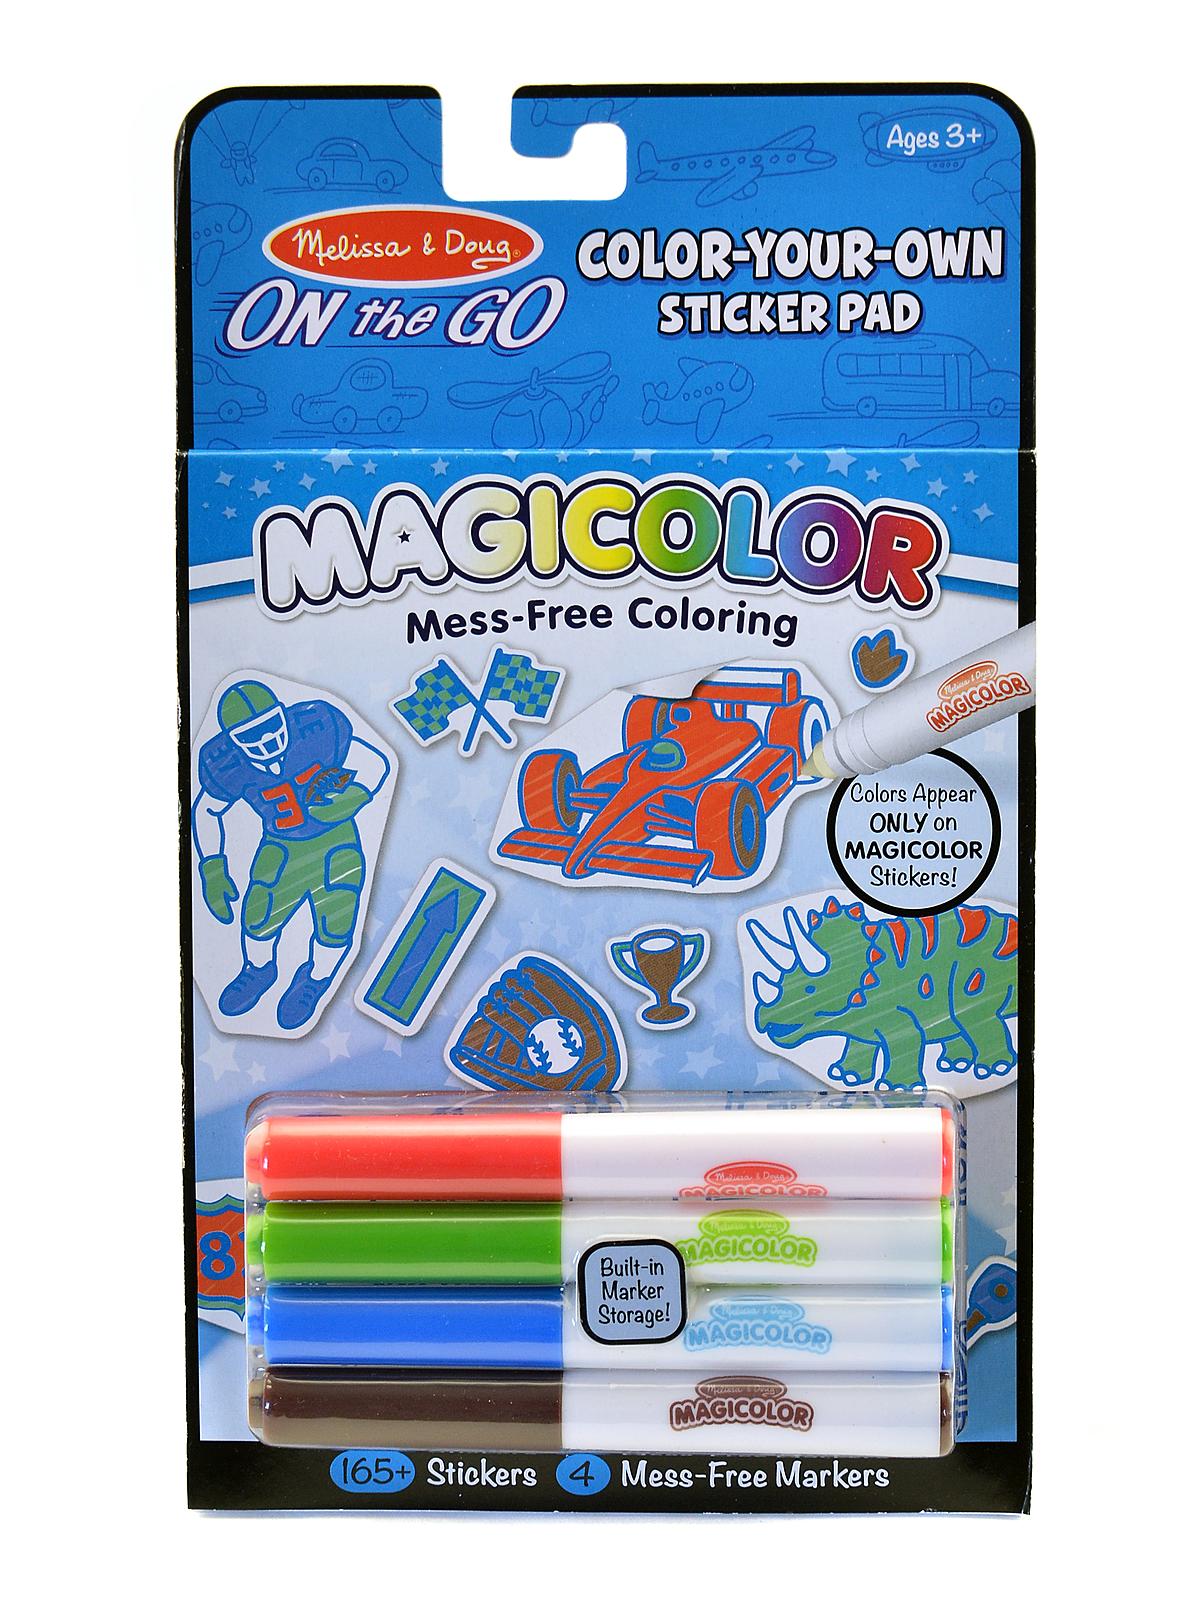 On The Go Magicolor Color-your-own Sticker Pad